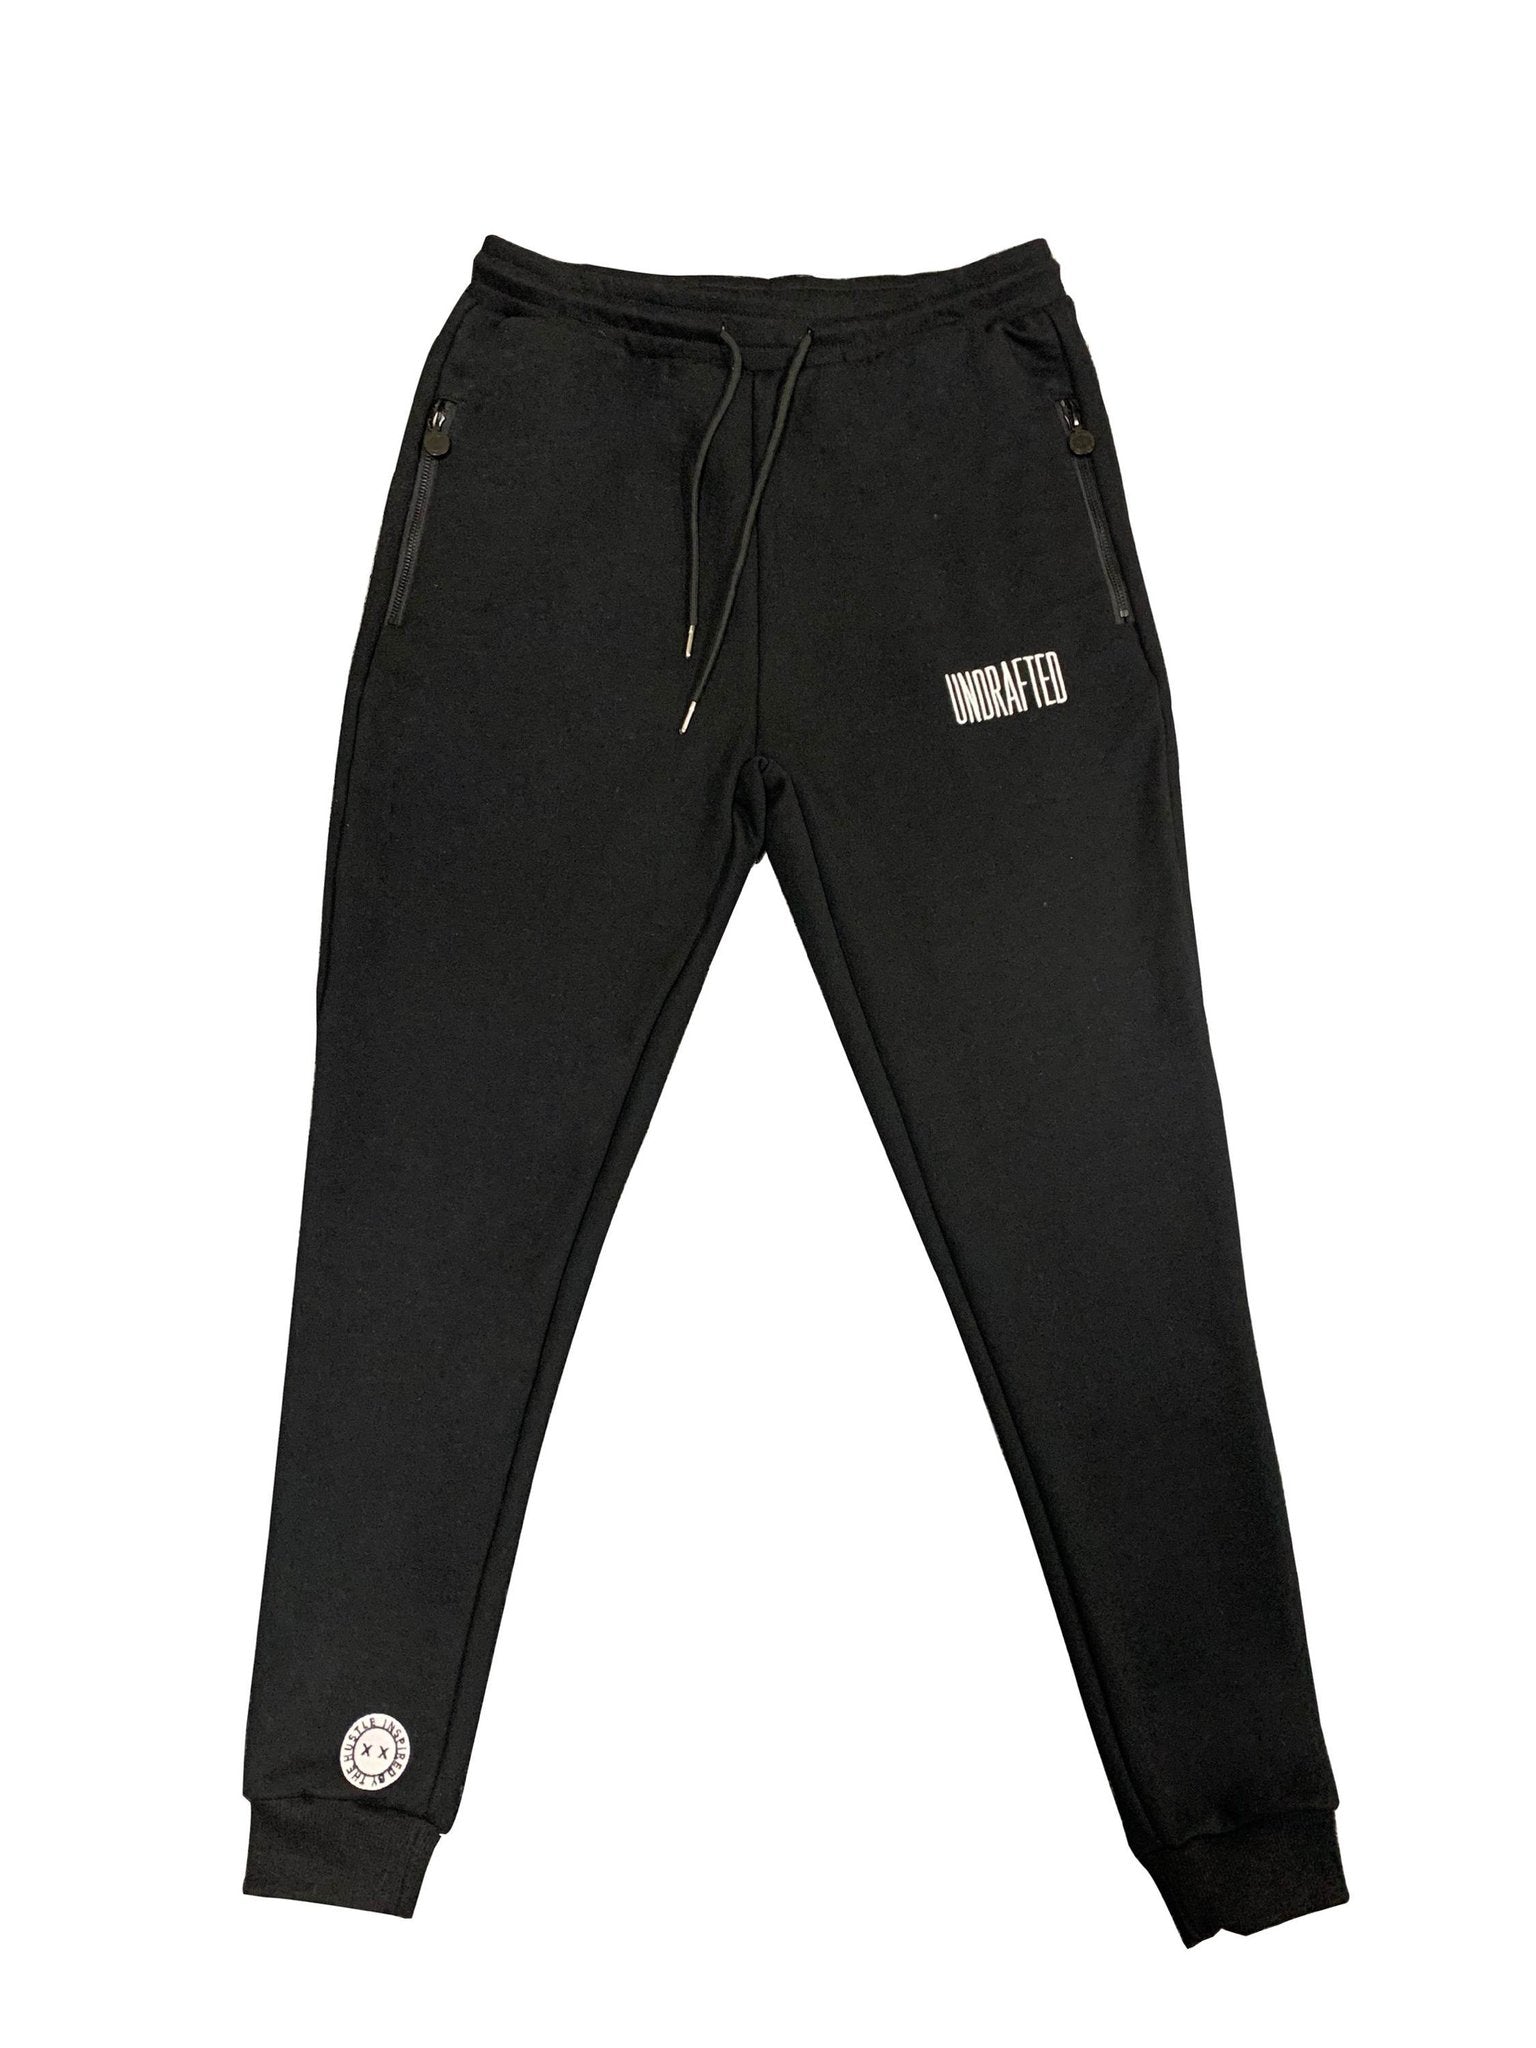 Undrafted Joggers Black/White